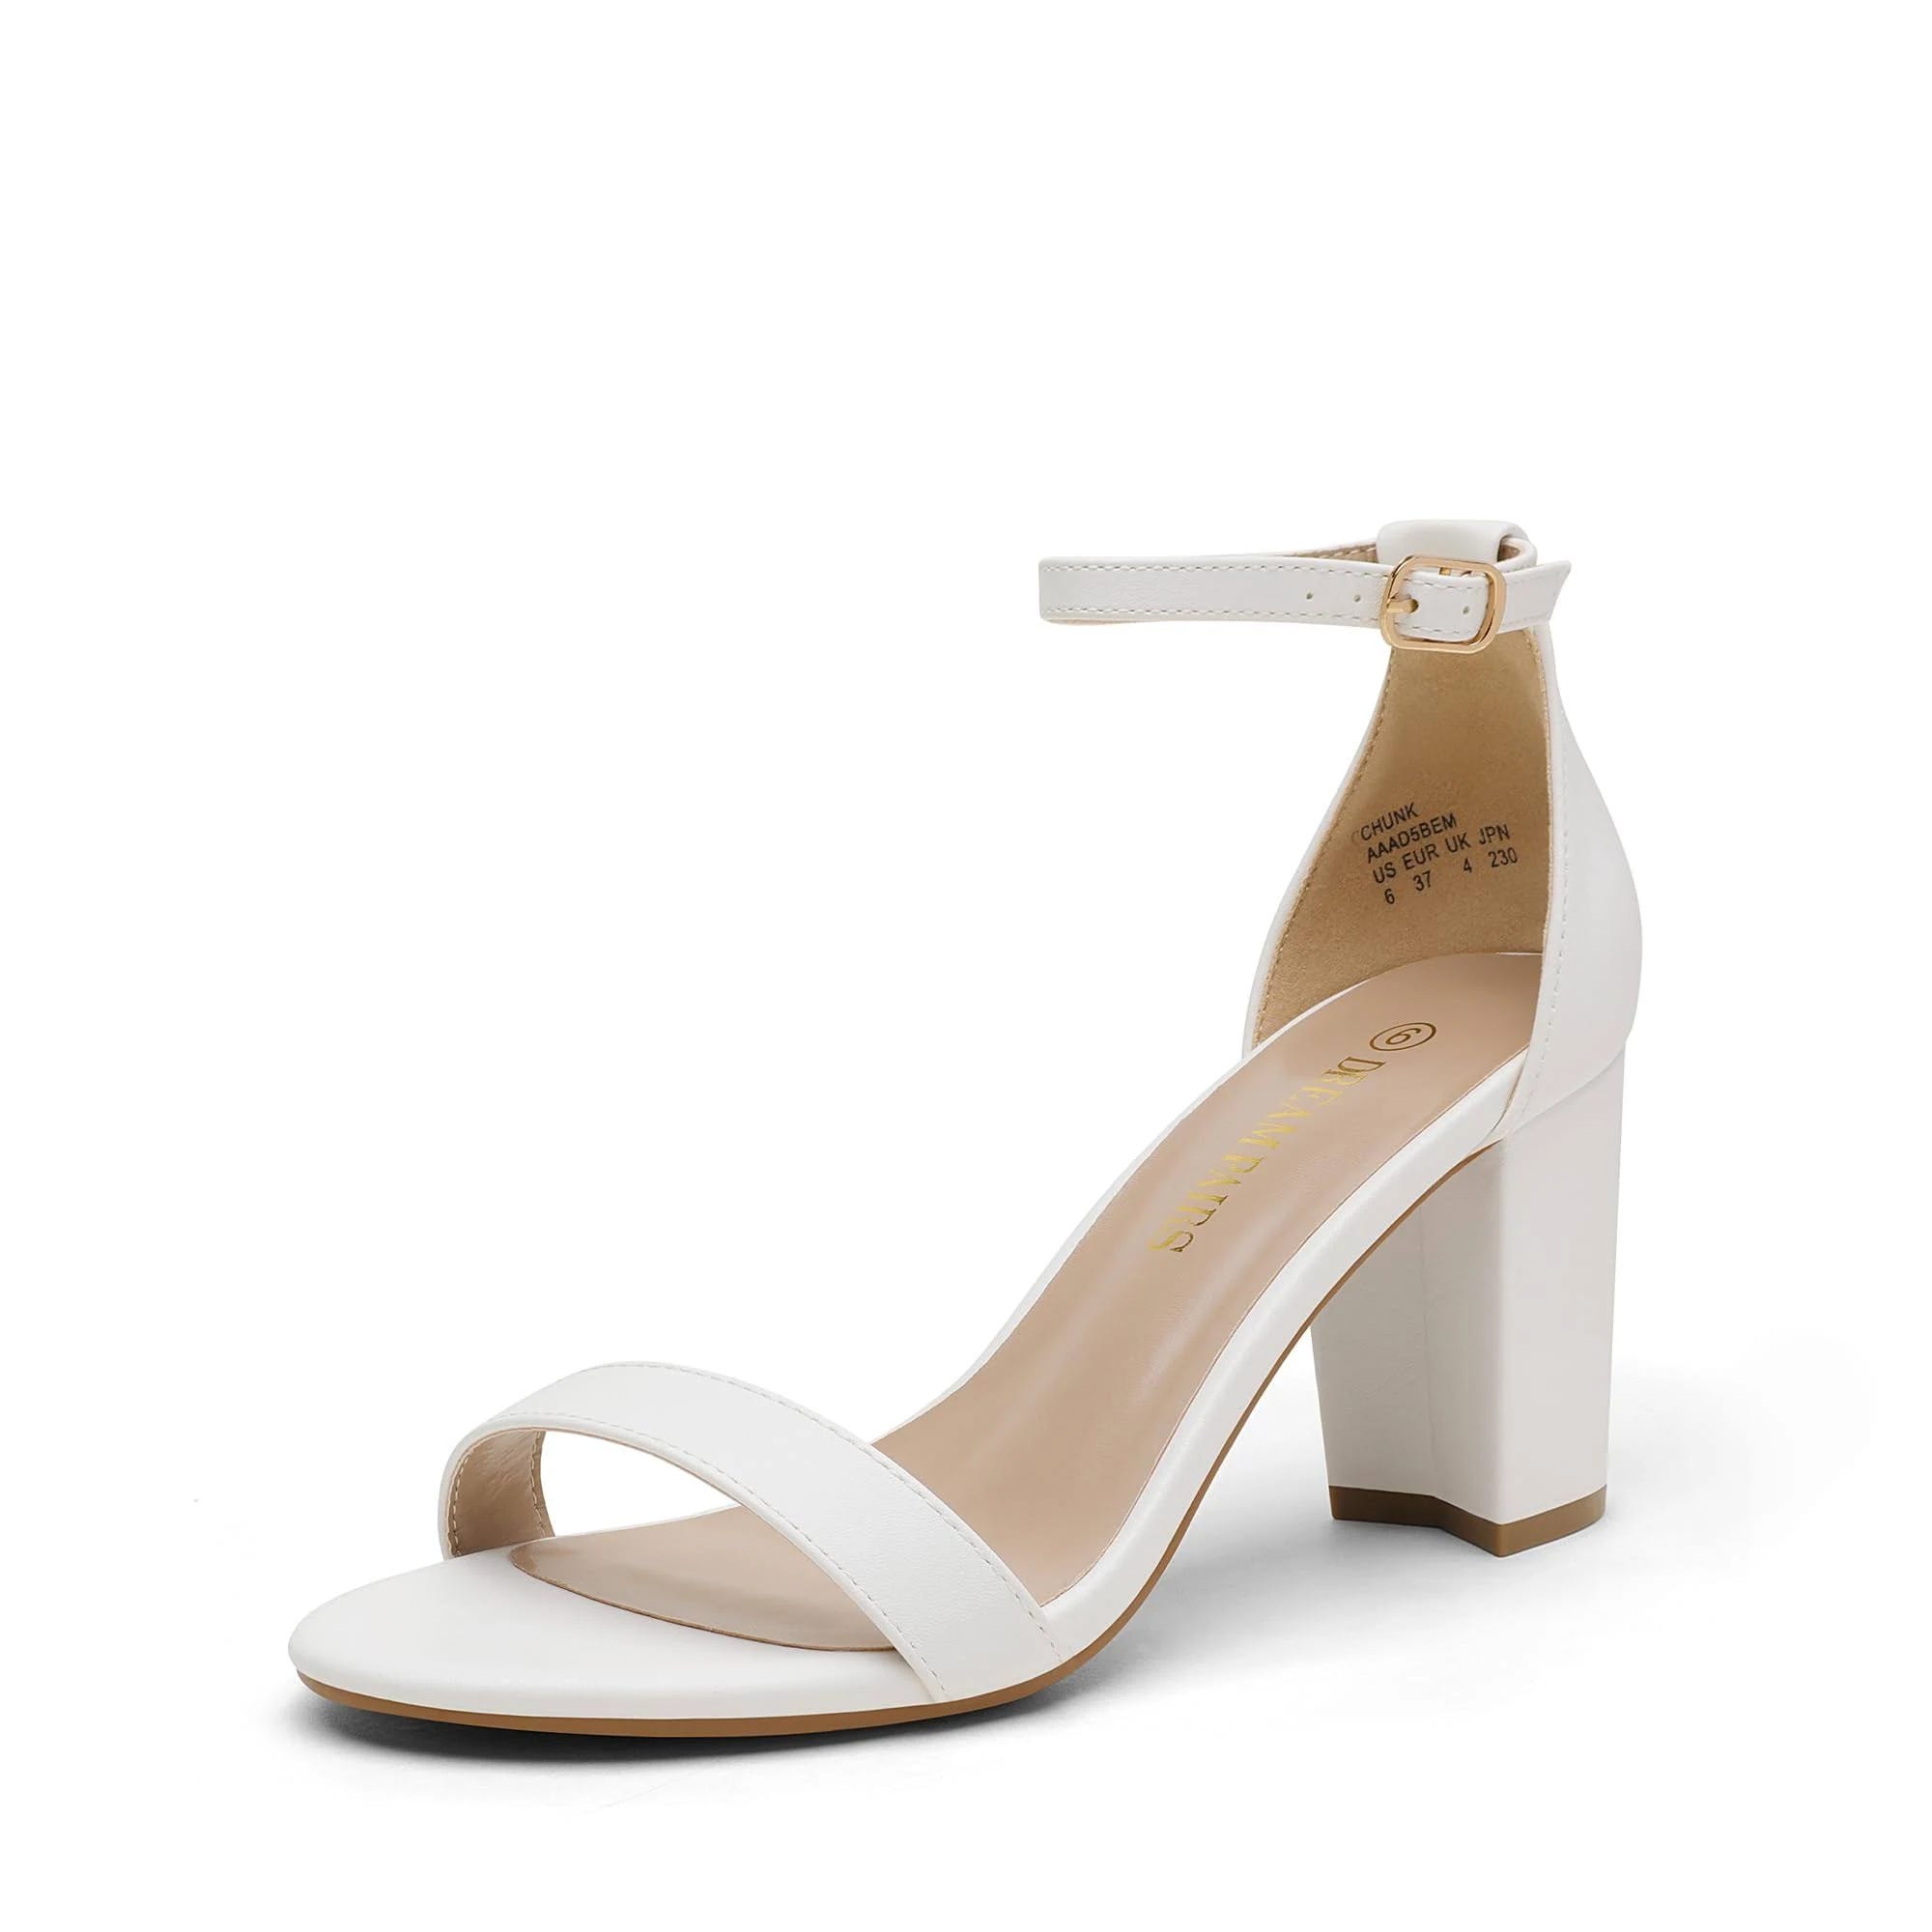 Sexy White Heels with Adjustable Buckle Strap | Image